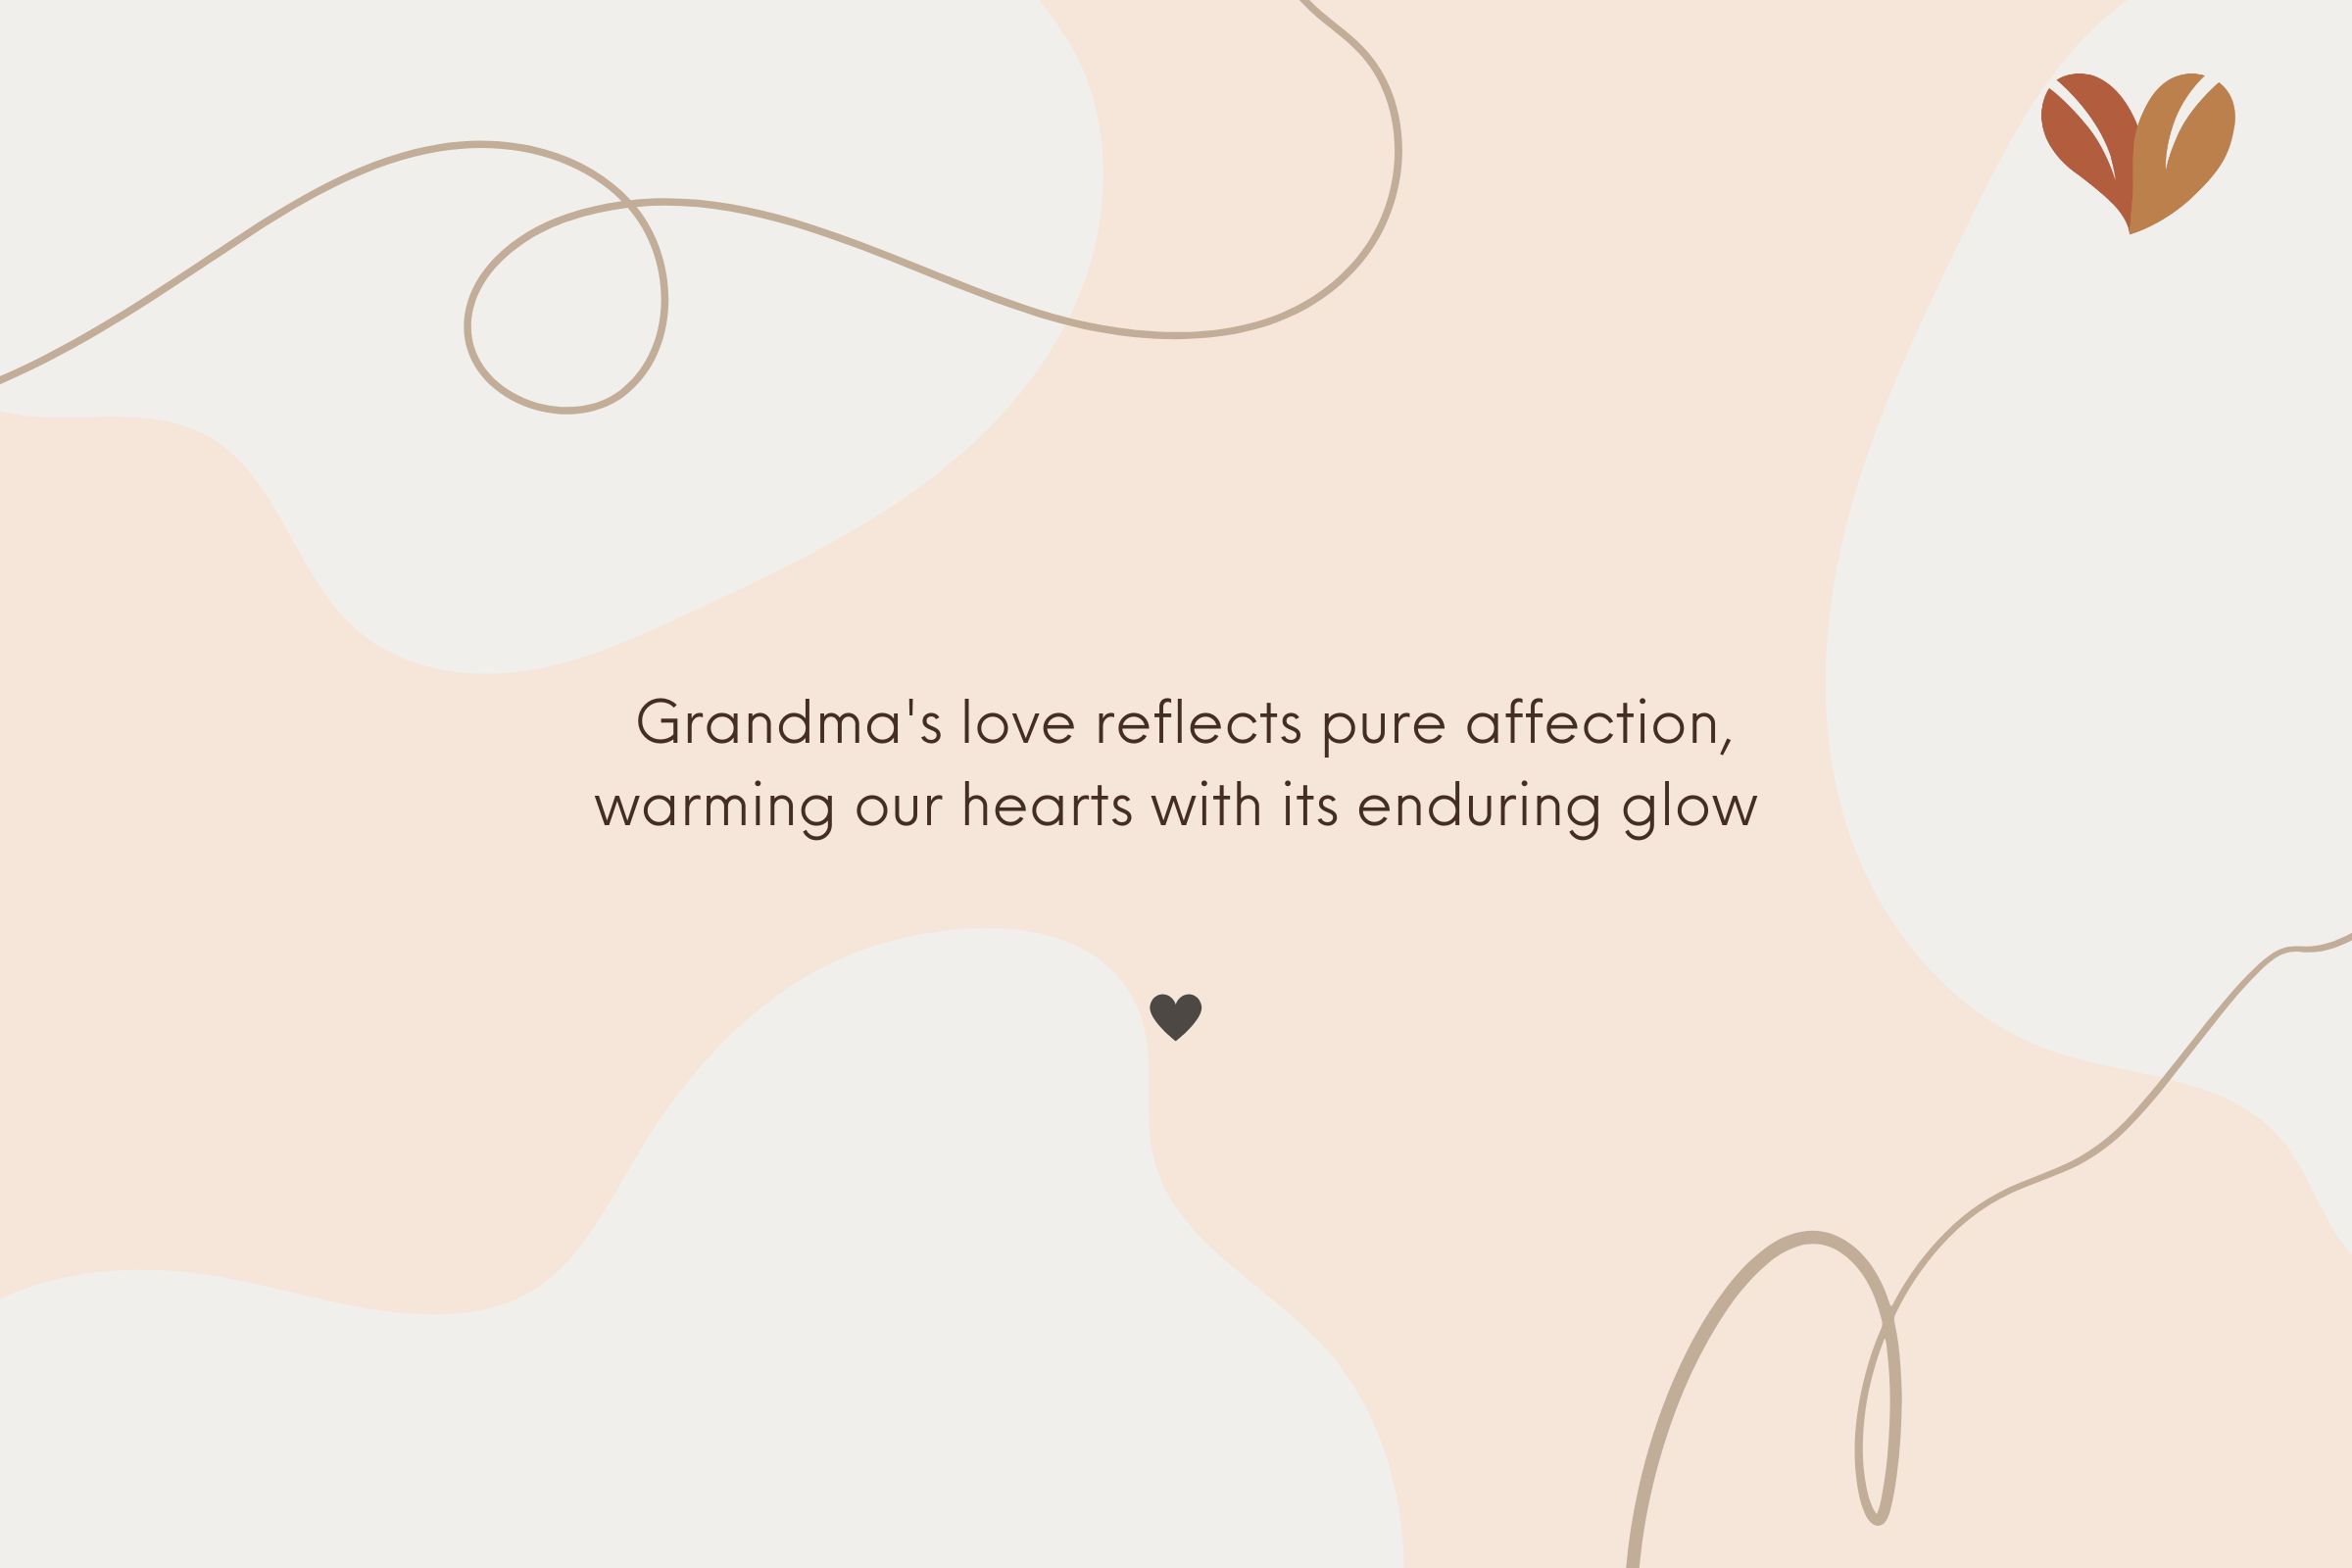 Grandmother Mothers Day Quotes: Grandma's love reflects pure affection, warming our hearts with its enduring glow.